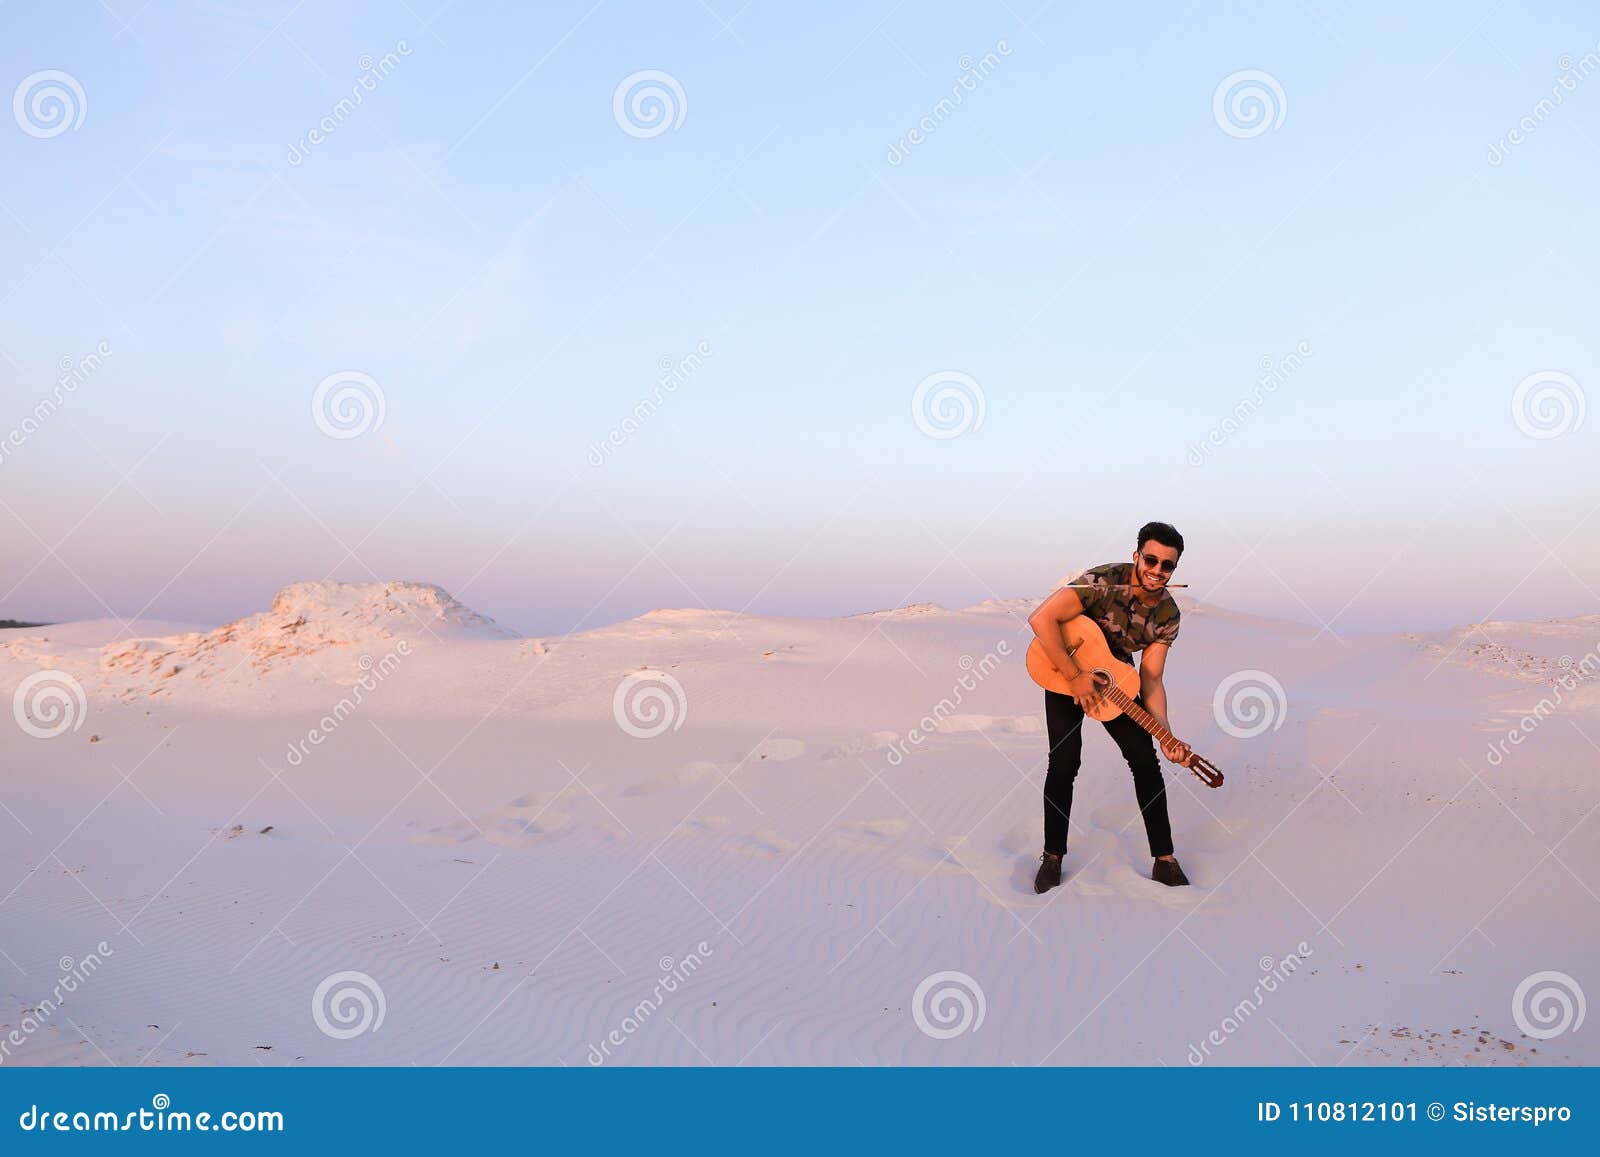 Arab Guy Goes Inspired By Beauty Of Desert And Plays 